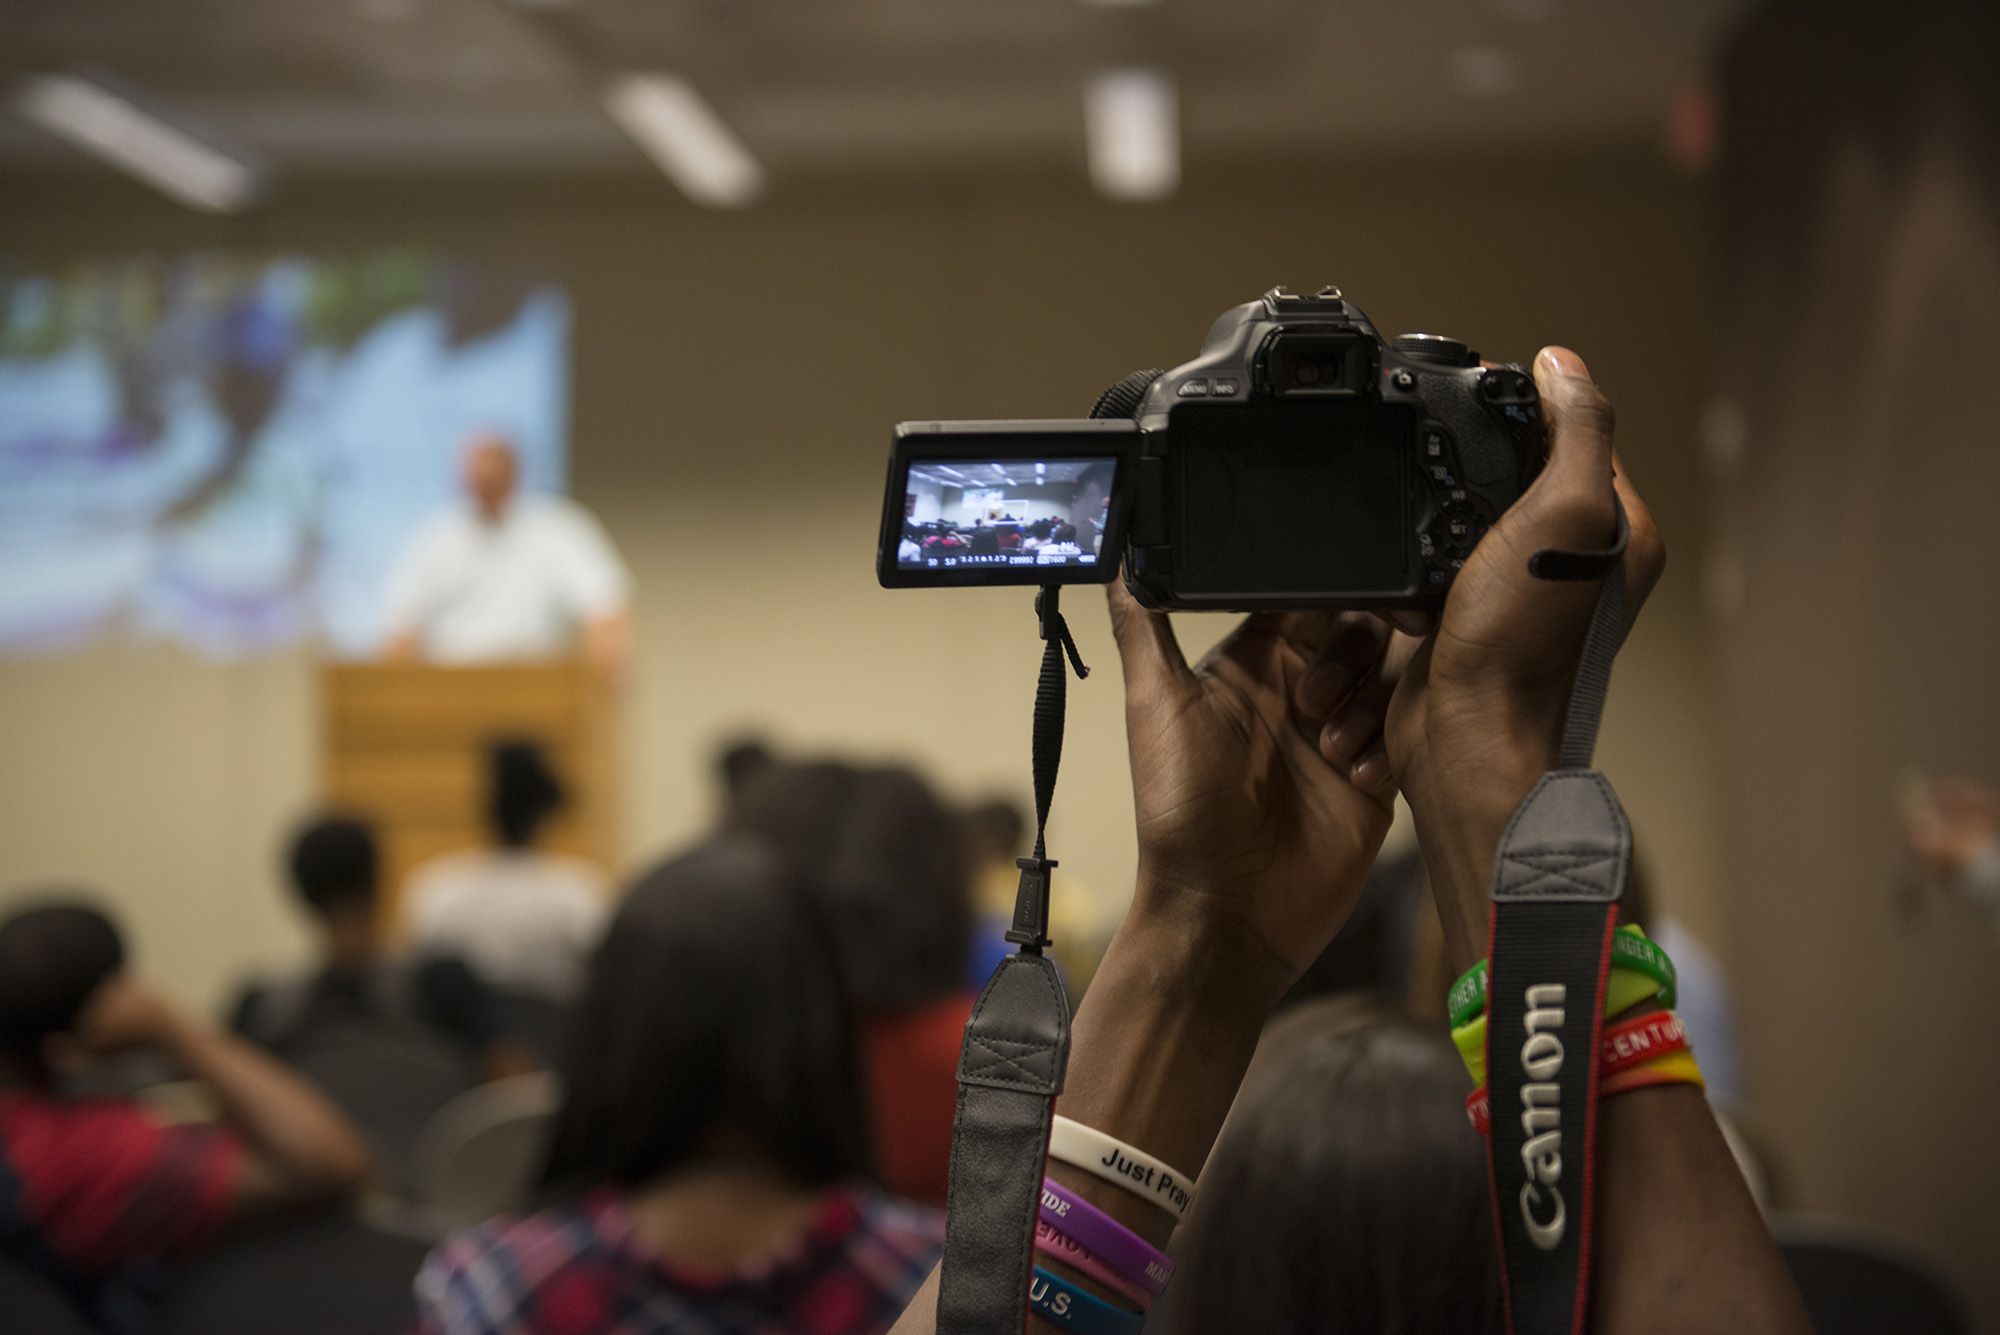 A Soul of the City student records video during Pulitzer Center grantee Roger Thurow's presentation. Image by Jordan Roth. United States, 2016.